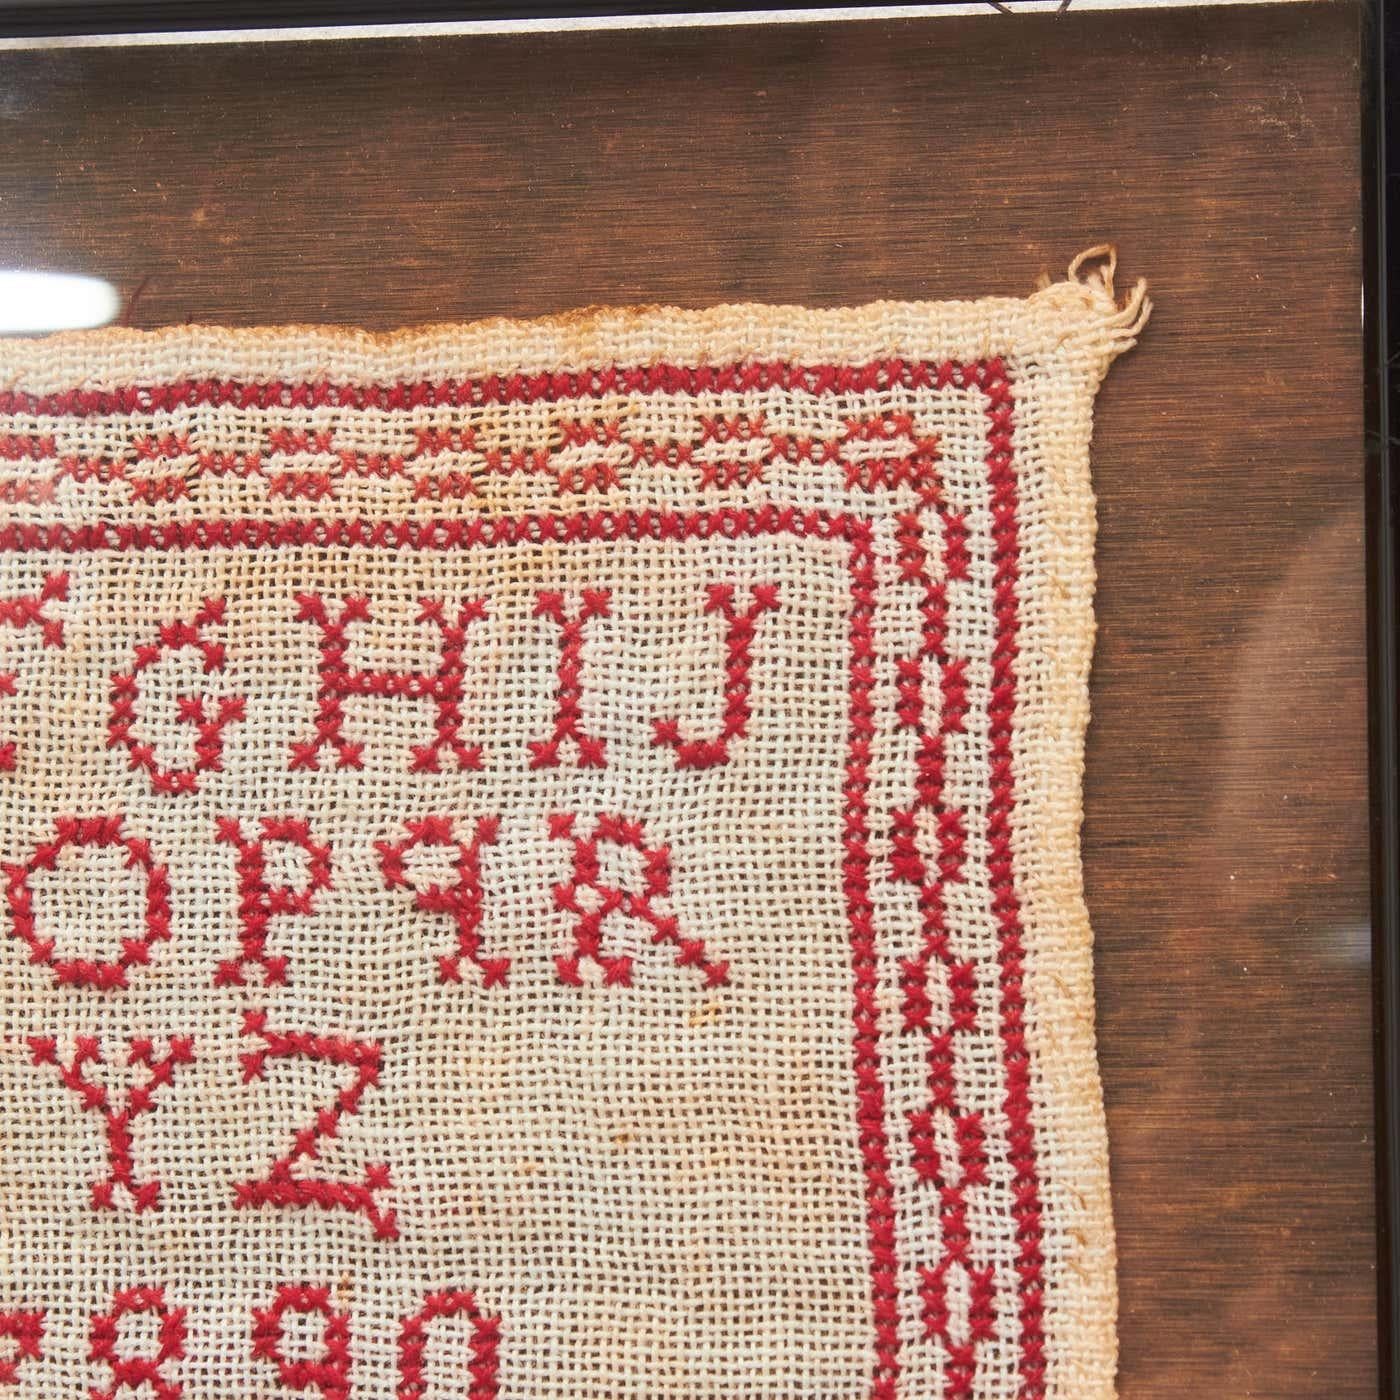 Elegant Nostalgia: Vintage 20th Century Cross-Stitch Sampler - Red on White In Good Condition For Sale In Barcelona, ES